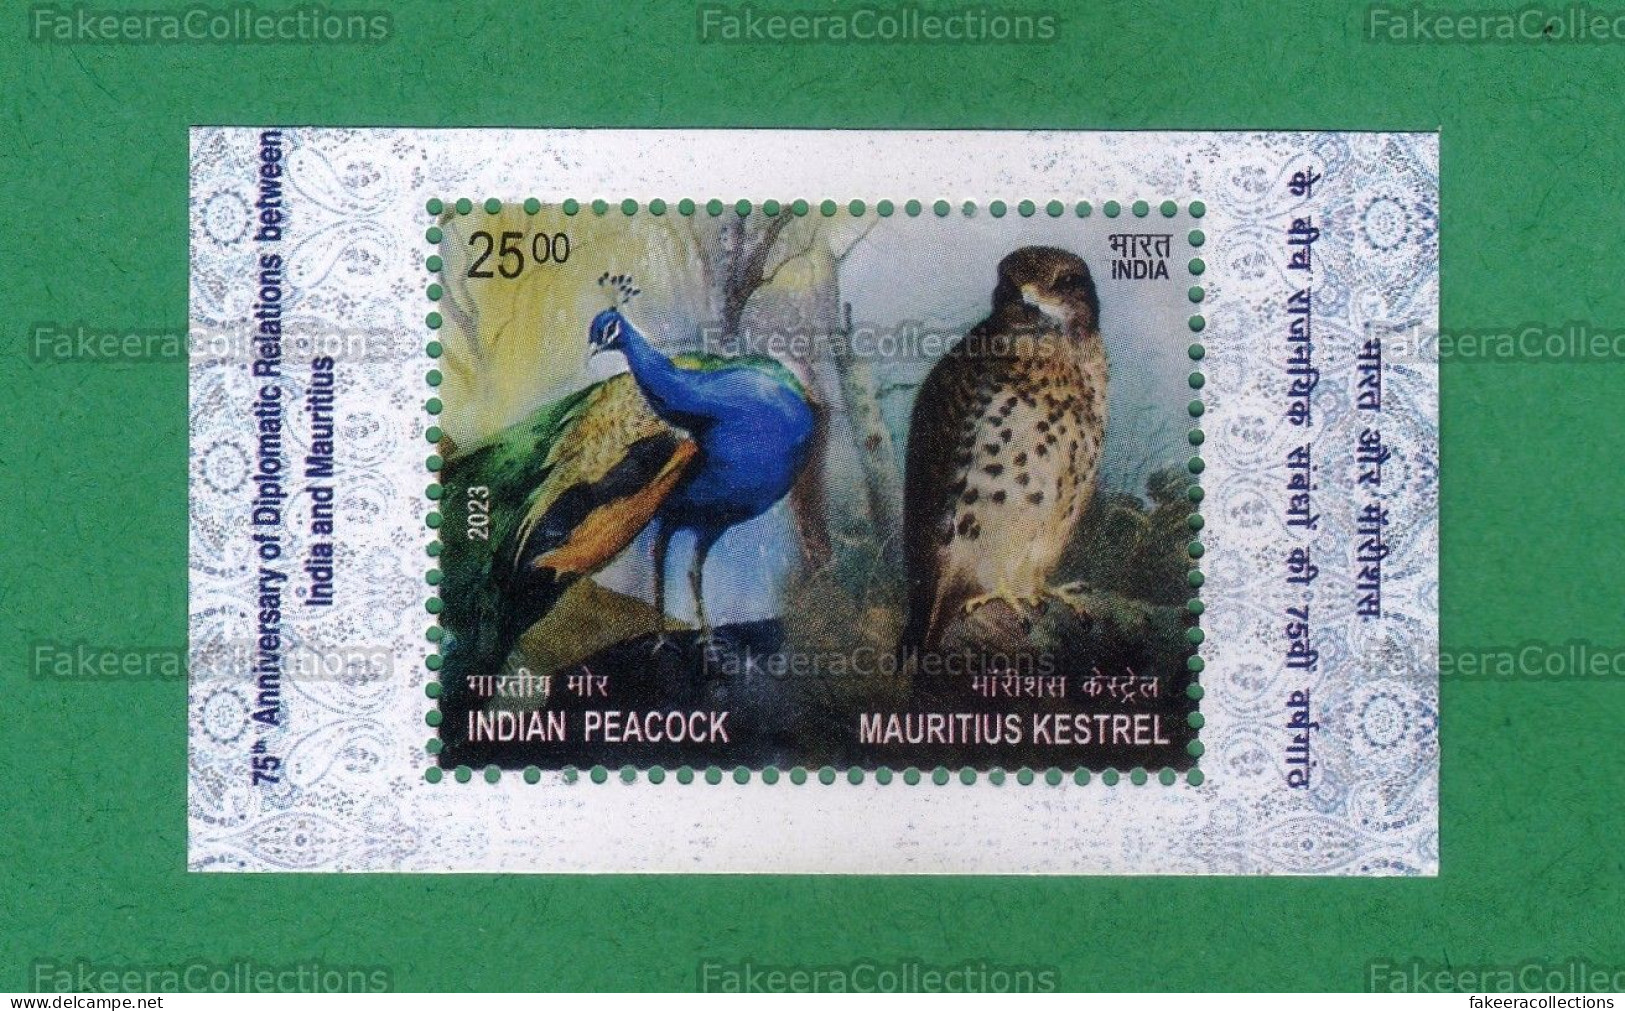 INDIA 2023 Inde Indien - JOINT ISSUE With MAURITIUS - BIRDS 1v M/S MNH ** - INDIAN PEACOCK, KESTREL, Diplomatic Relation - Adler & Greifvögel